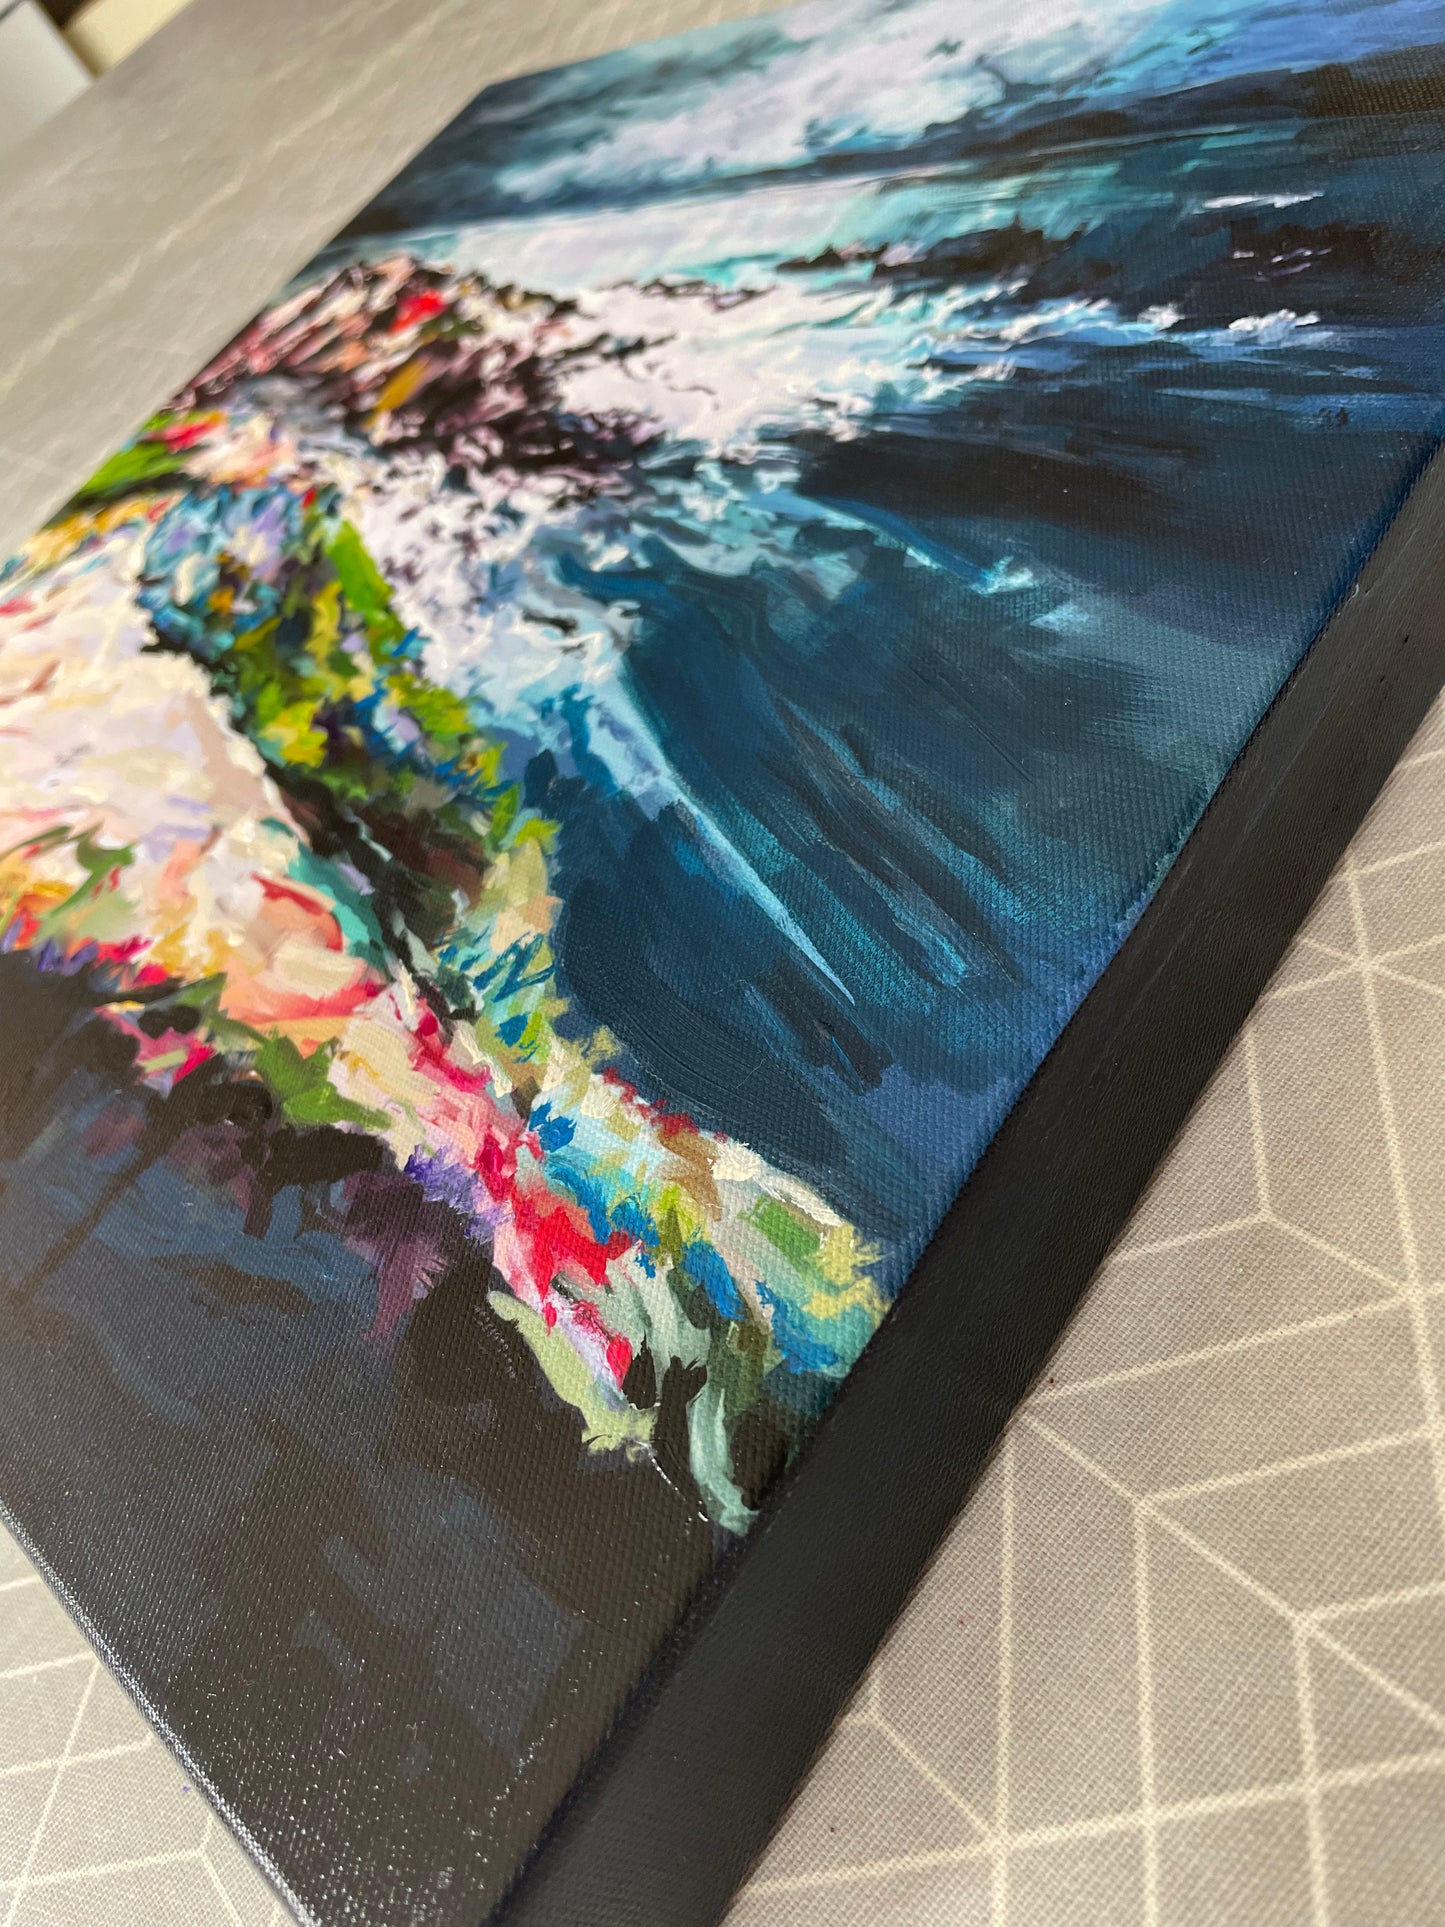 Seascape painting. Colourful original art on stretched canvas, ready to hang.